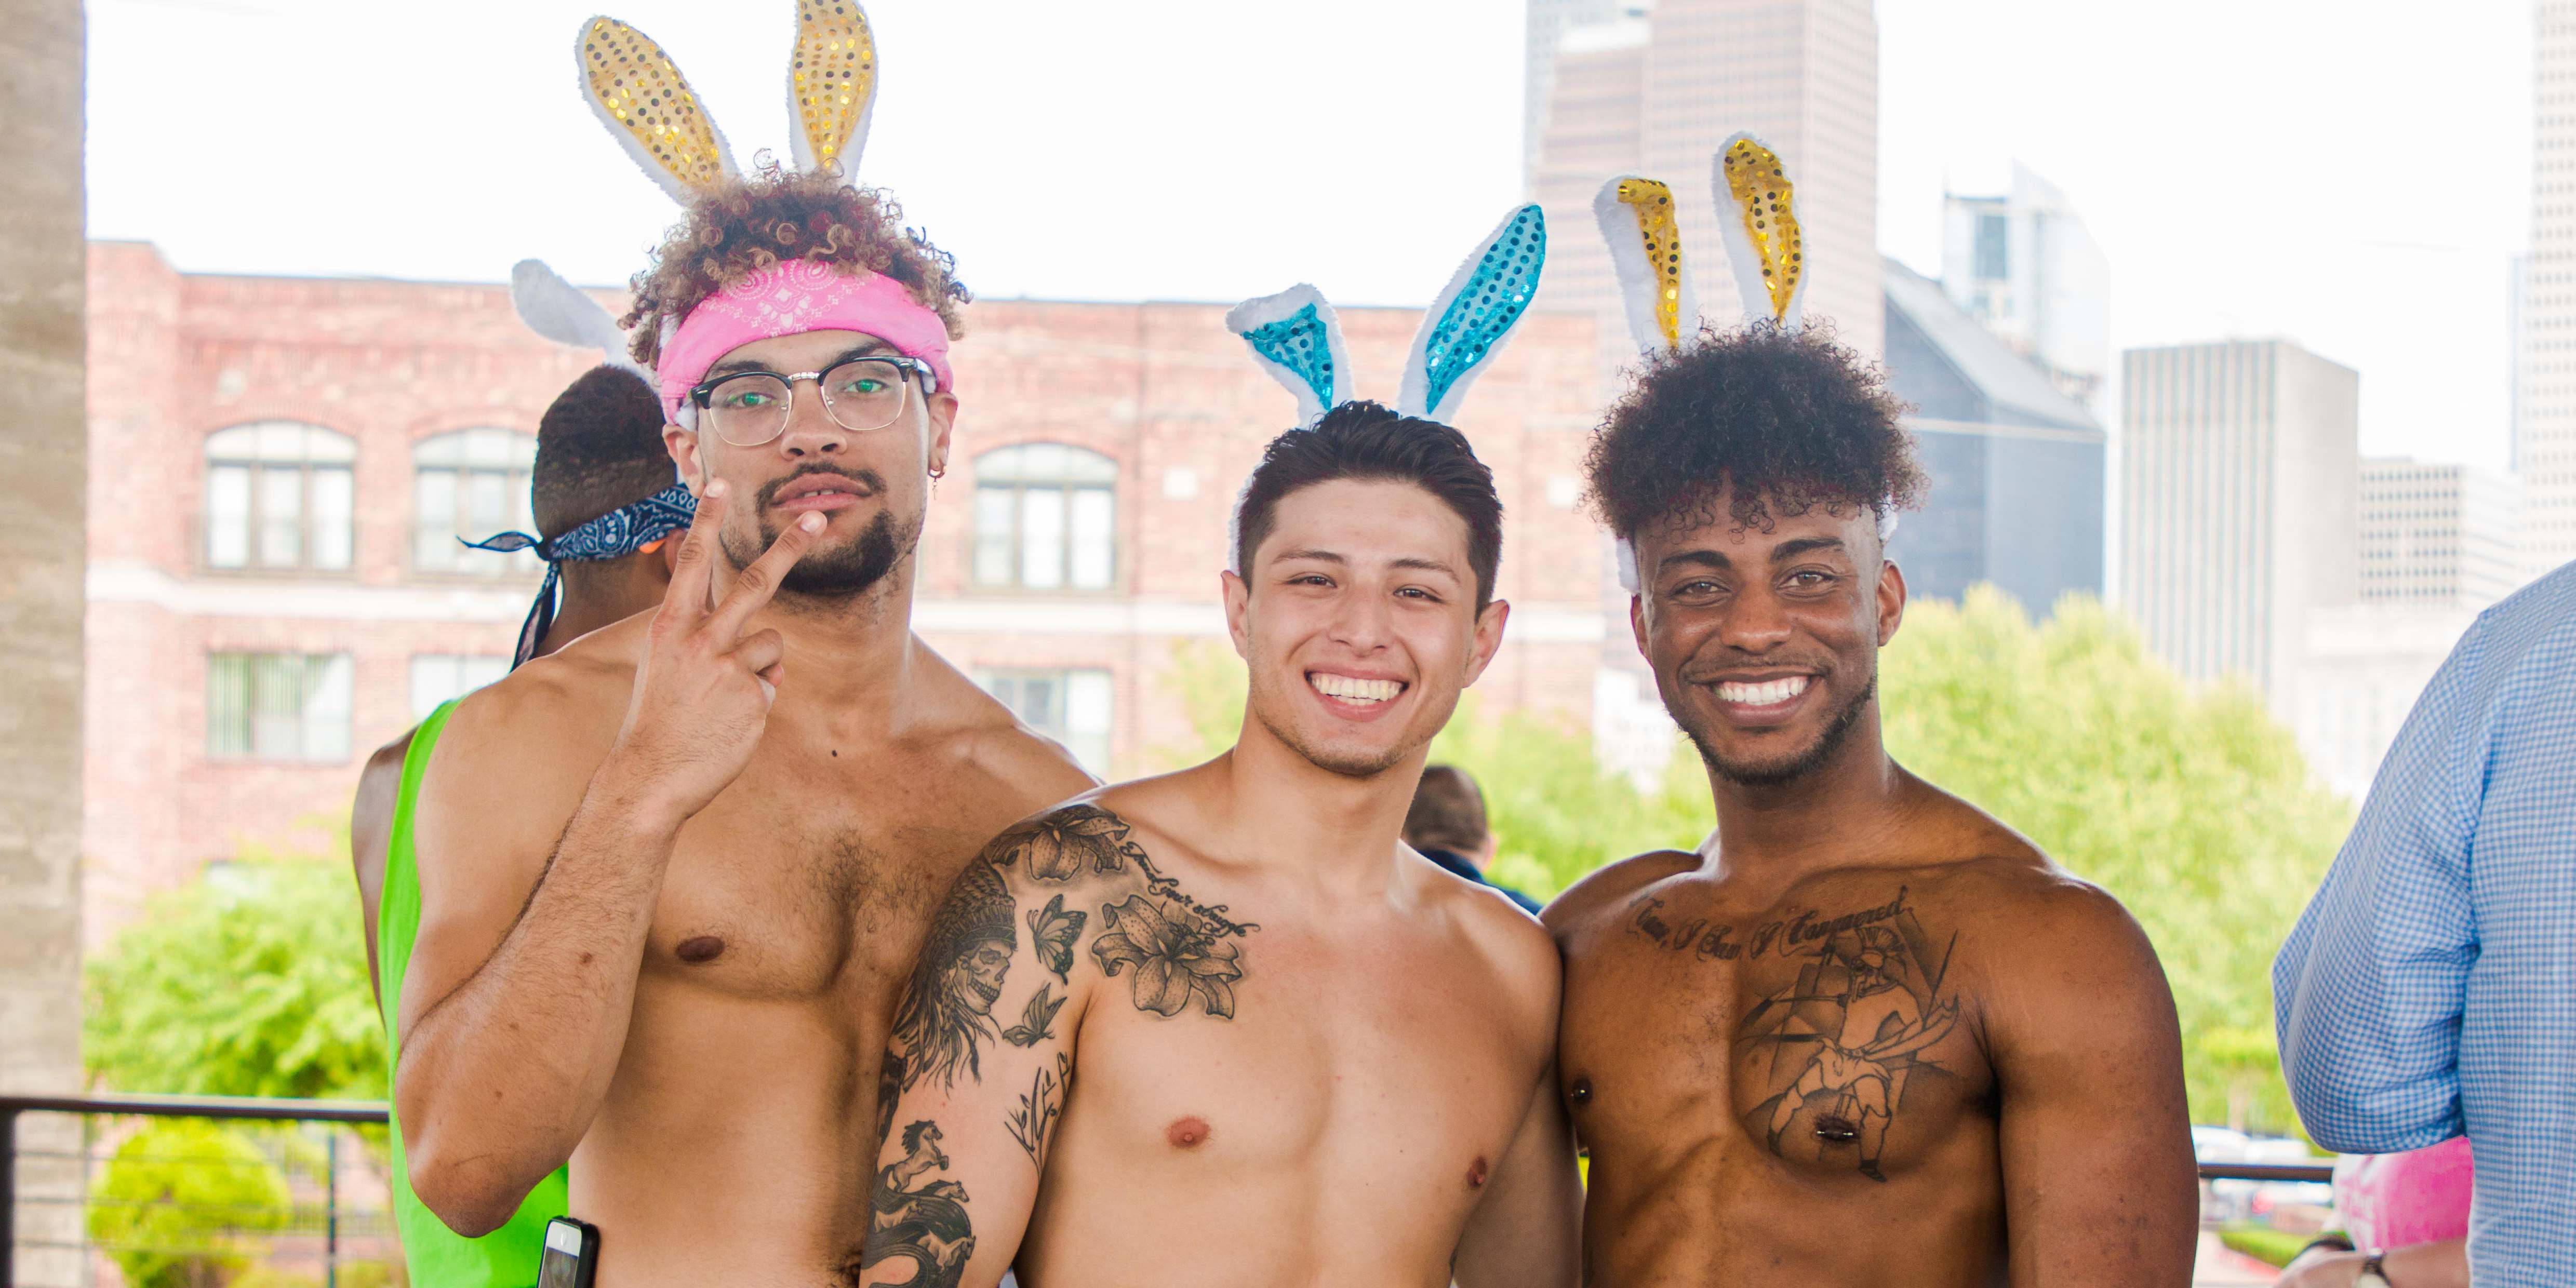 23 shirtless hunk wearing bunny ears and over-the-top Easter bonnets